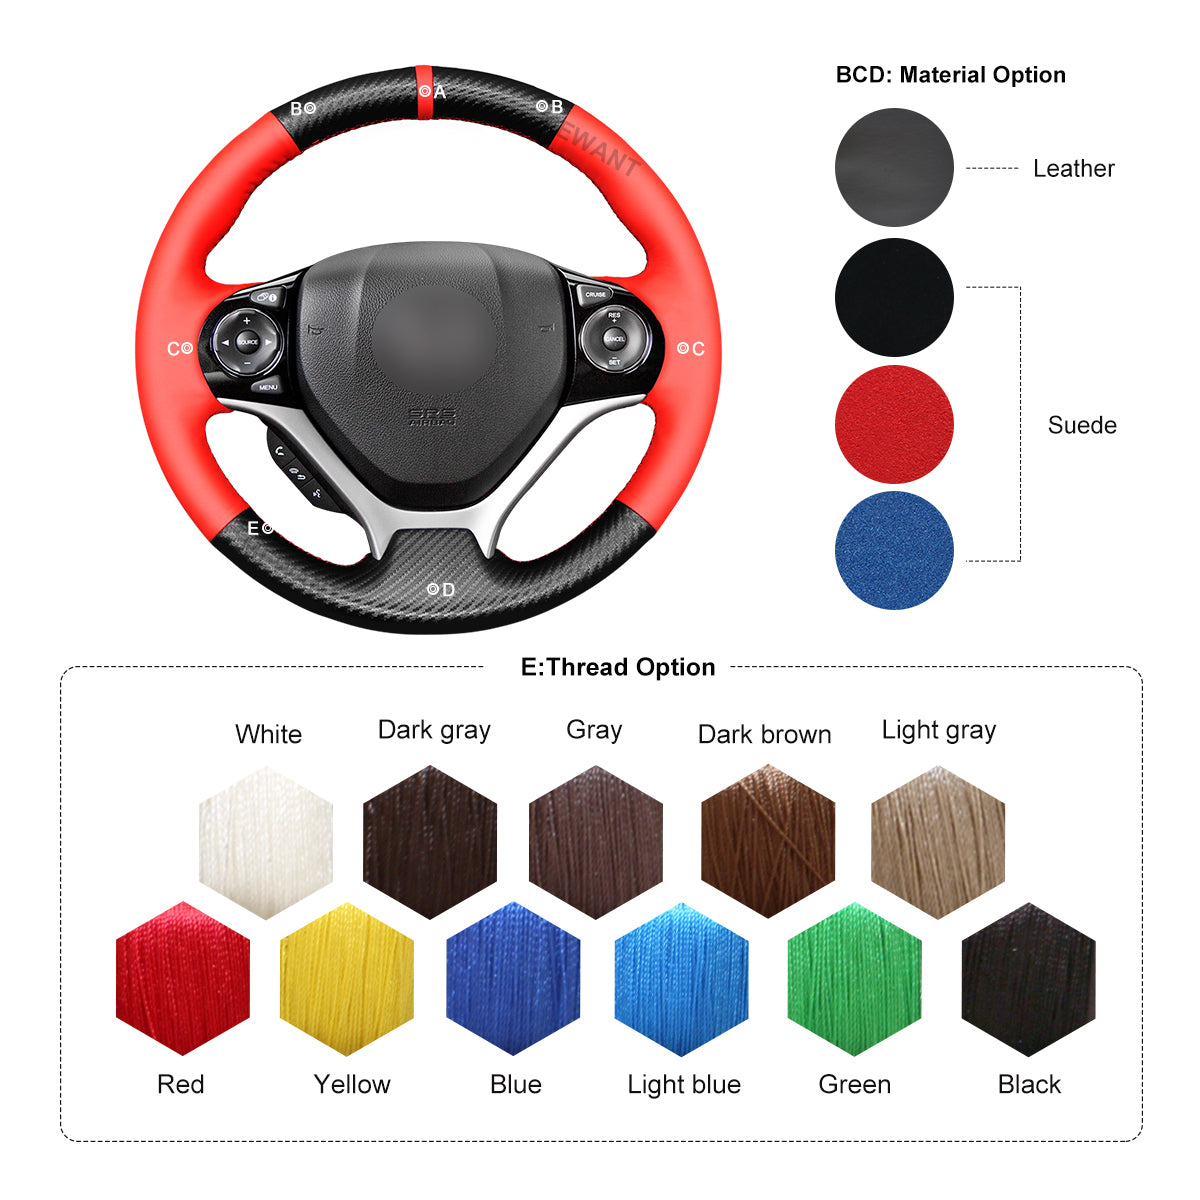 MEWANT Leather Suede Carbon Fiber Car Steering Wheel Cover for Honda Civic 9 2012-2017